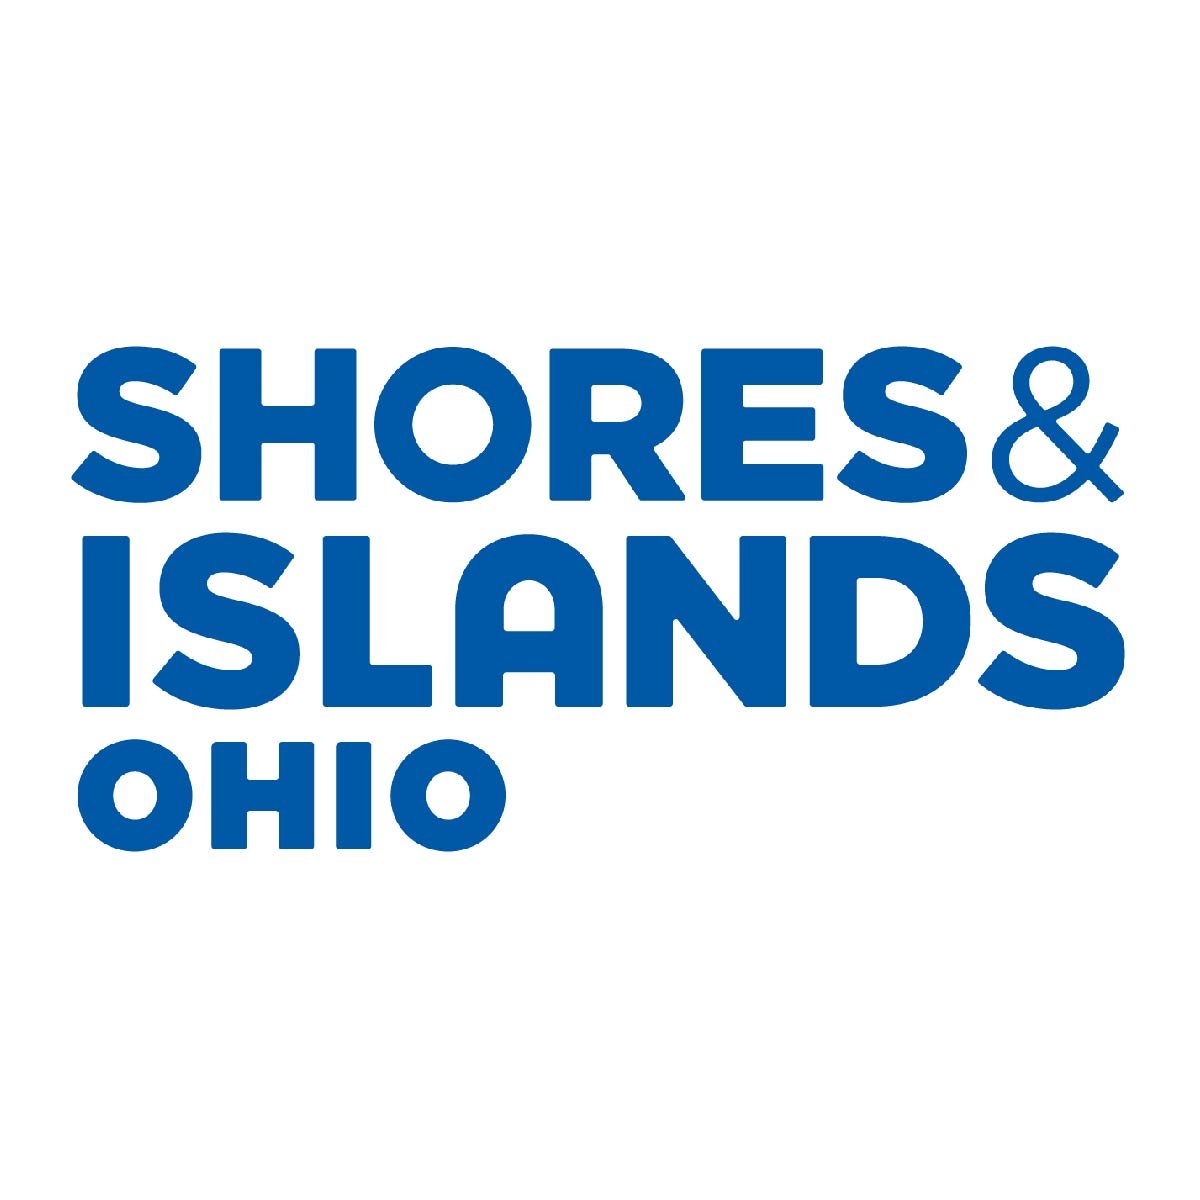 shores and islands for website-01.jpg